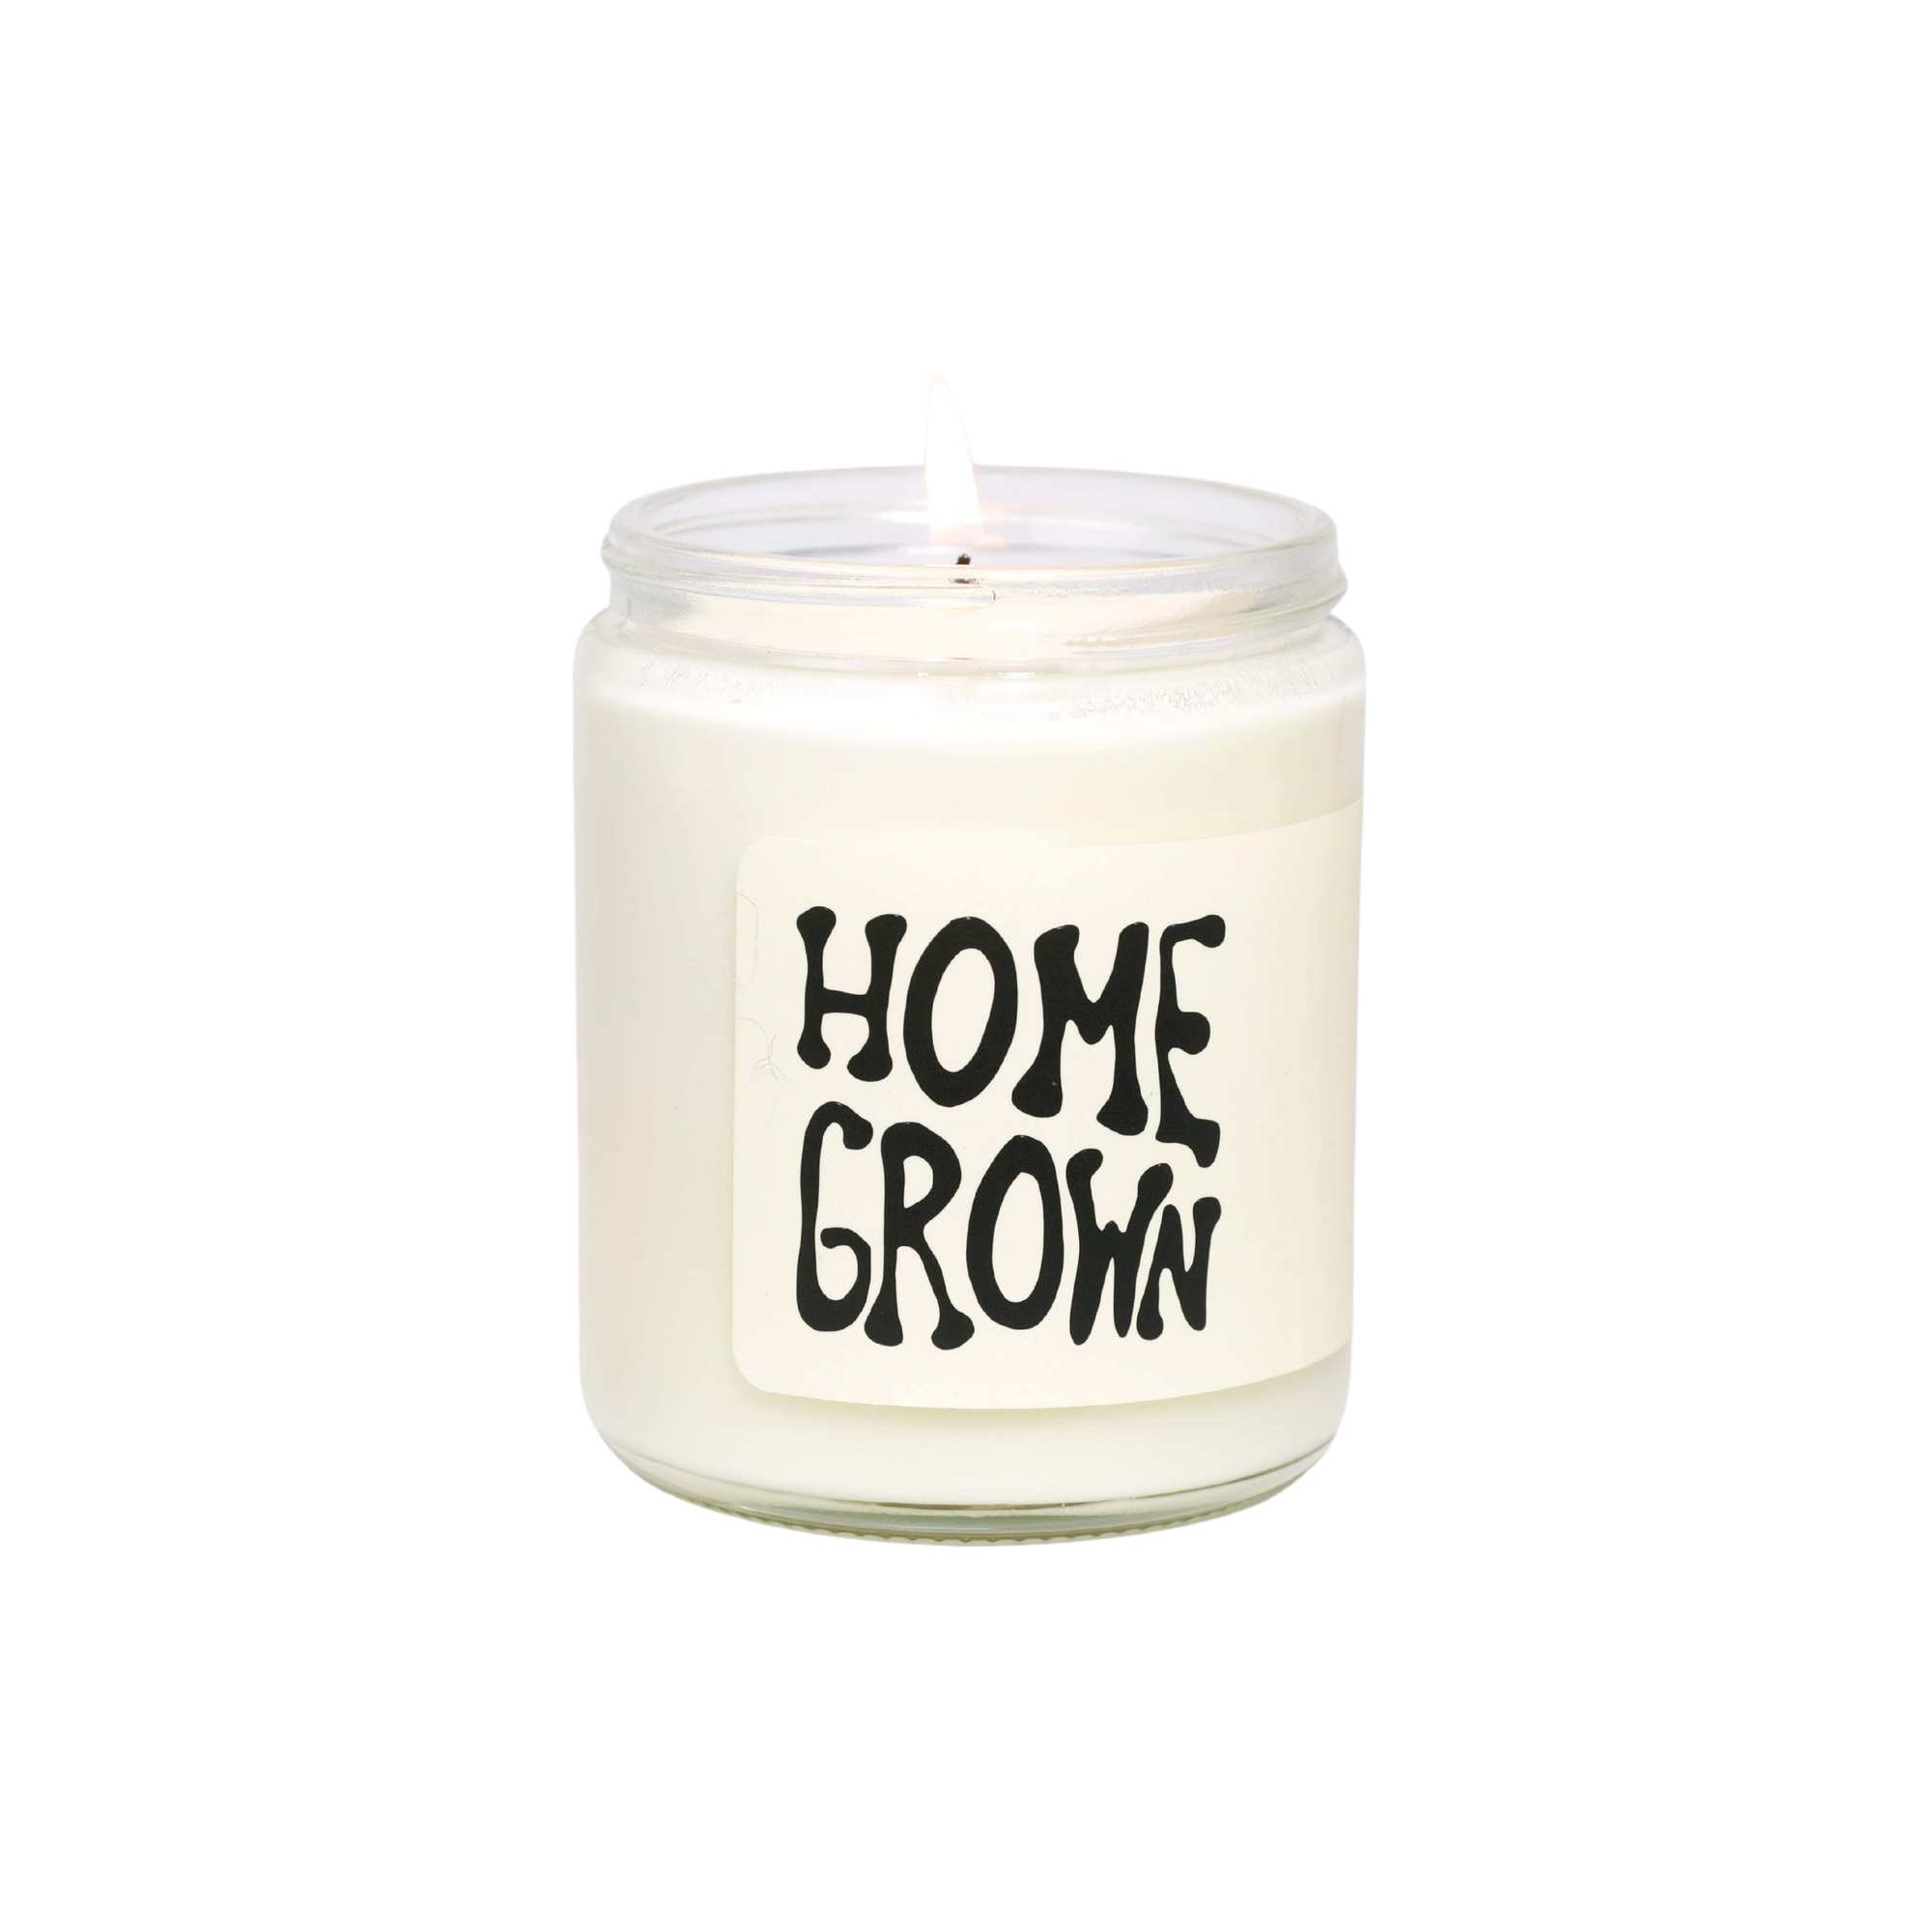 Home Grown - Candle - 8 oz - MOCO Candles